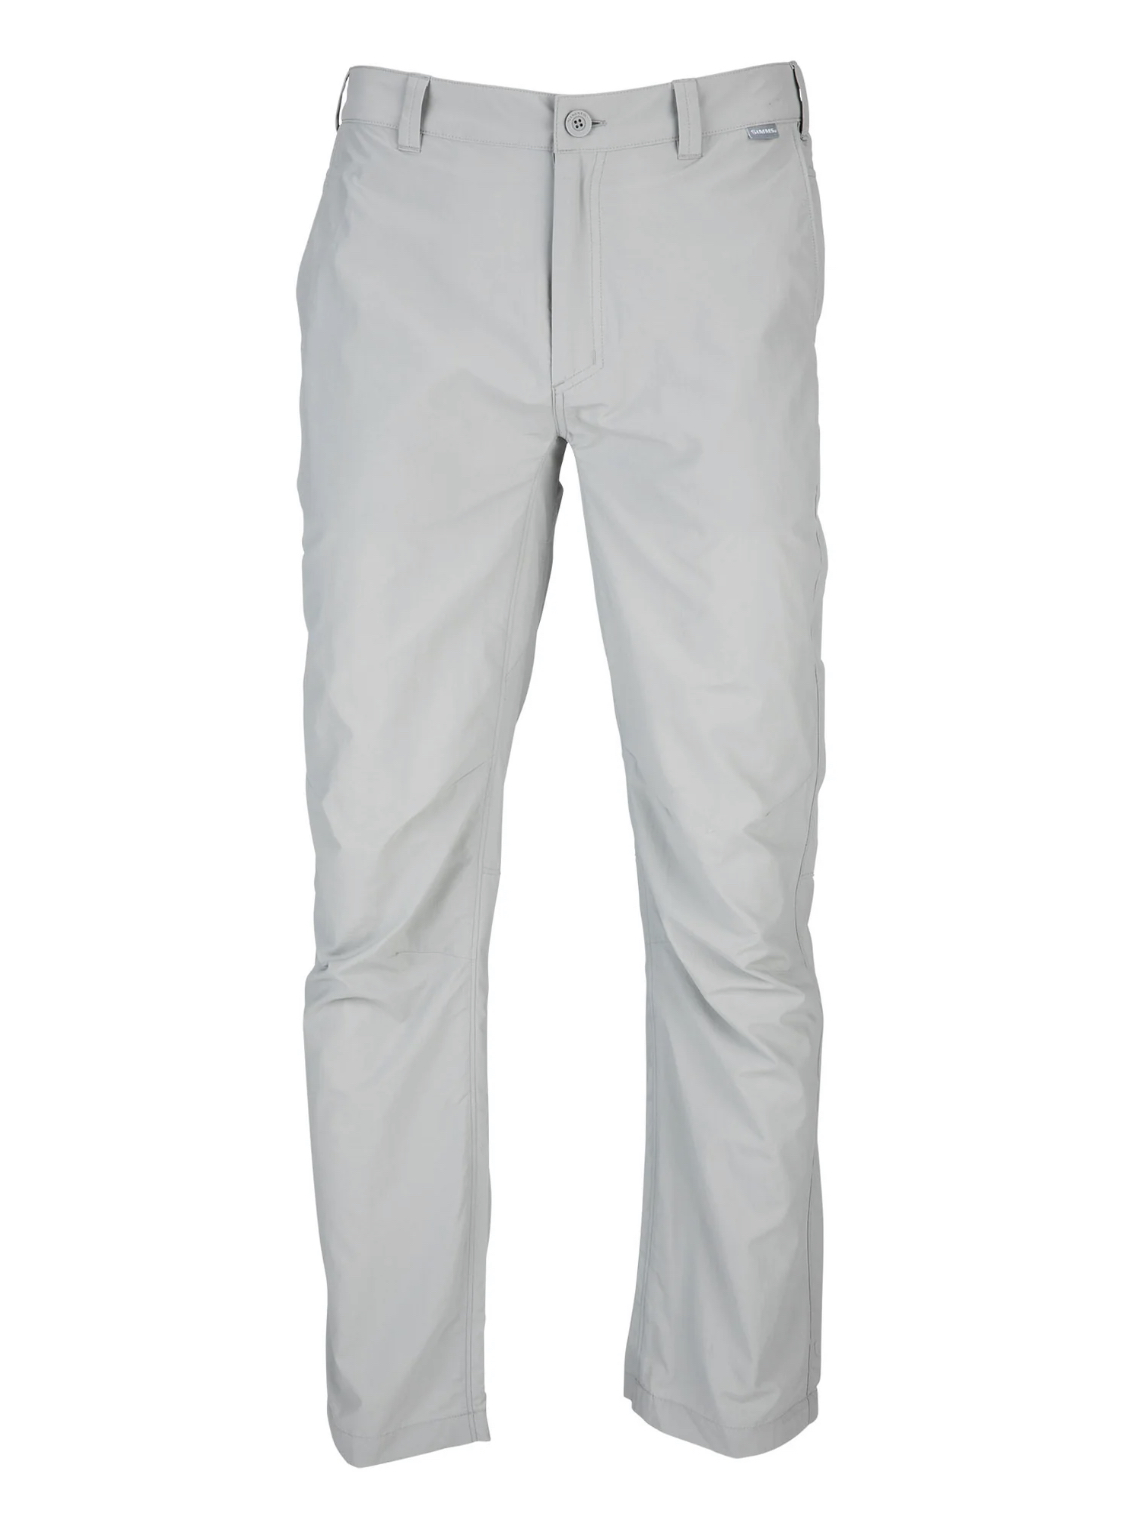 Simms M's Superlight Pant - Sterling - Small (32